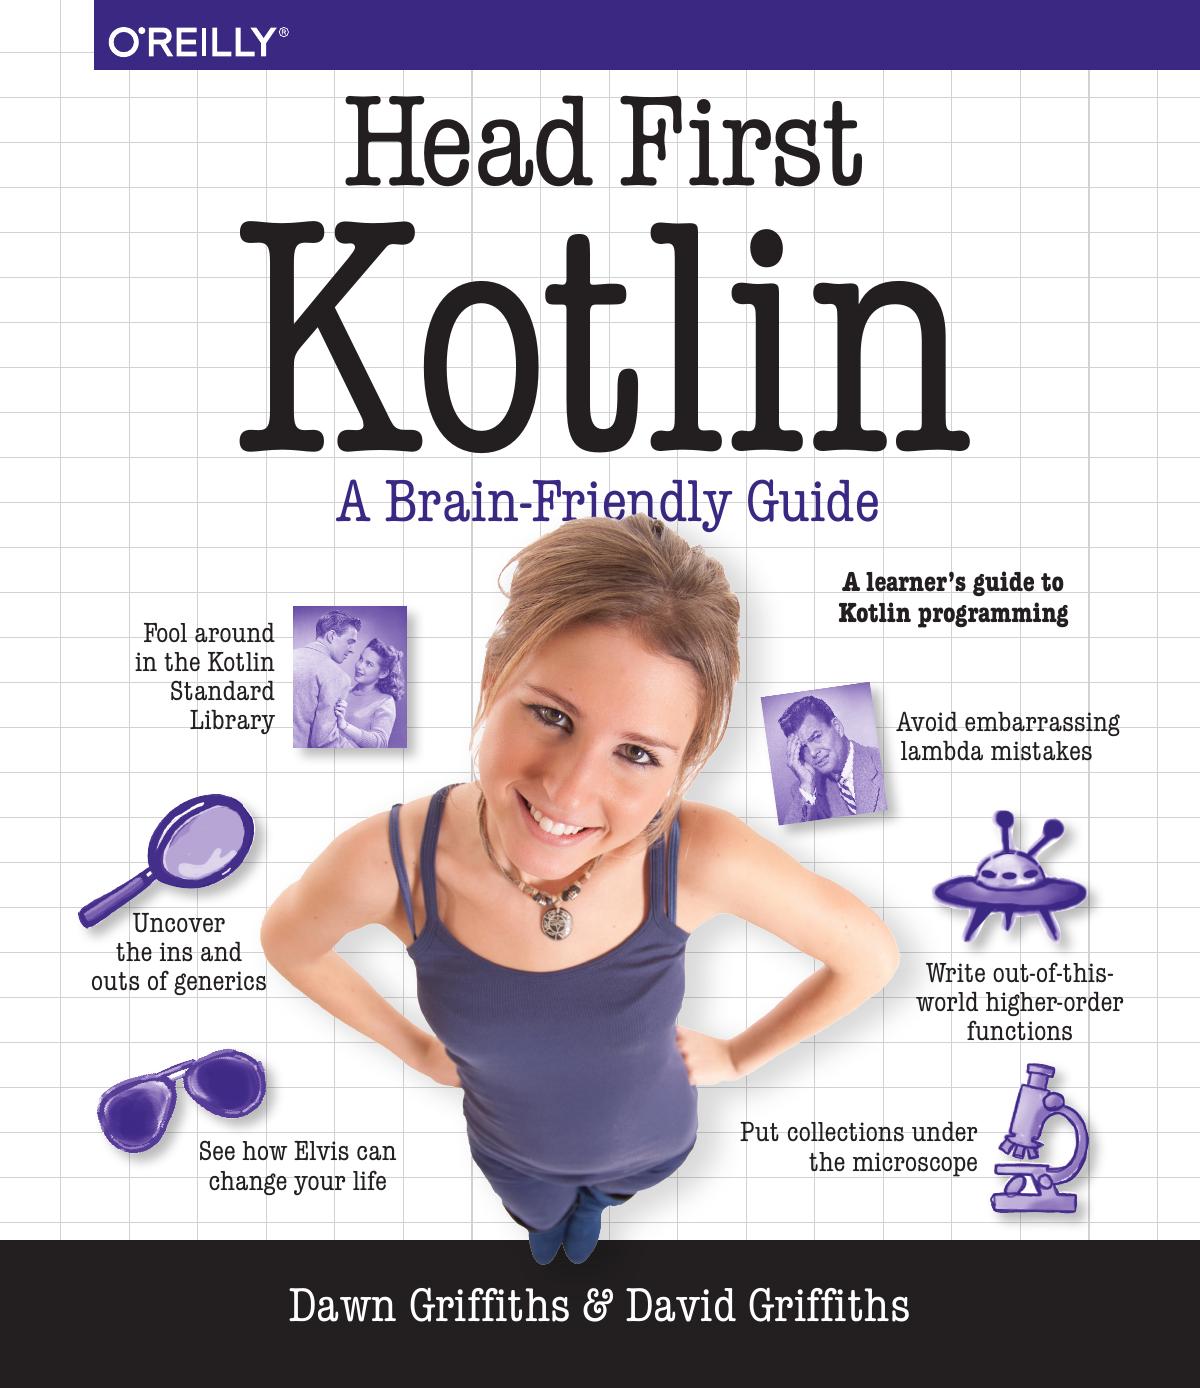 Head First Kotlin by Dawn Griffiths and David Griffiths